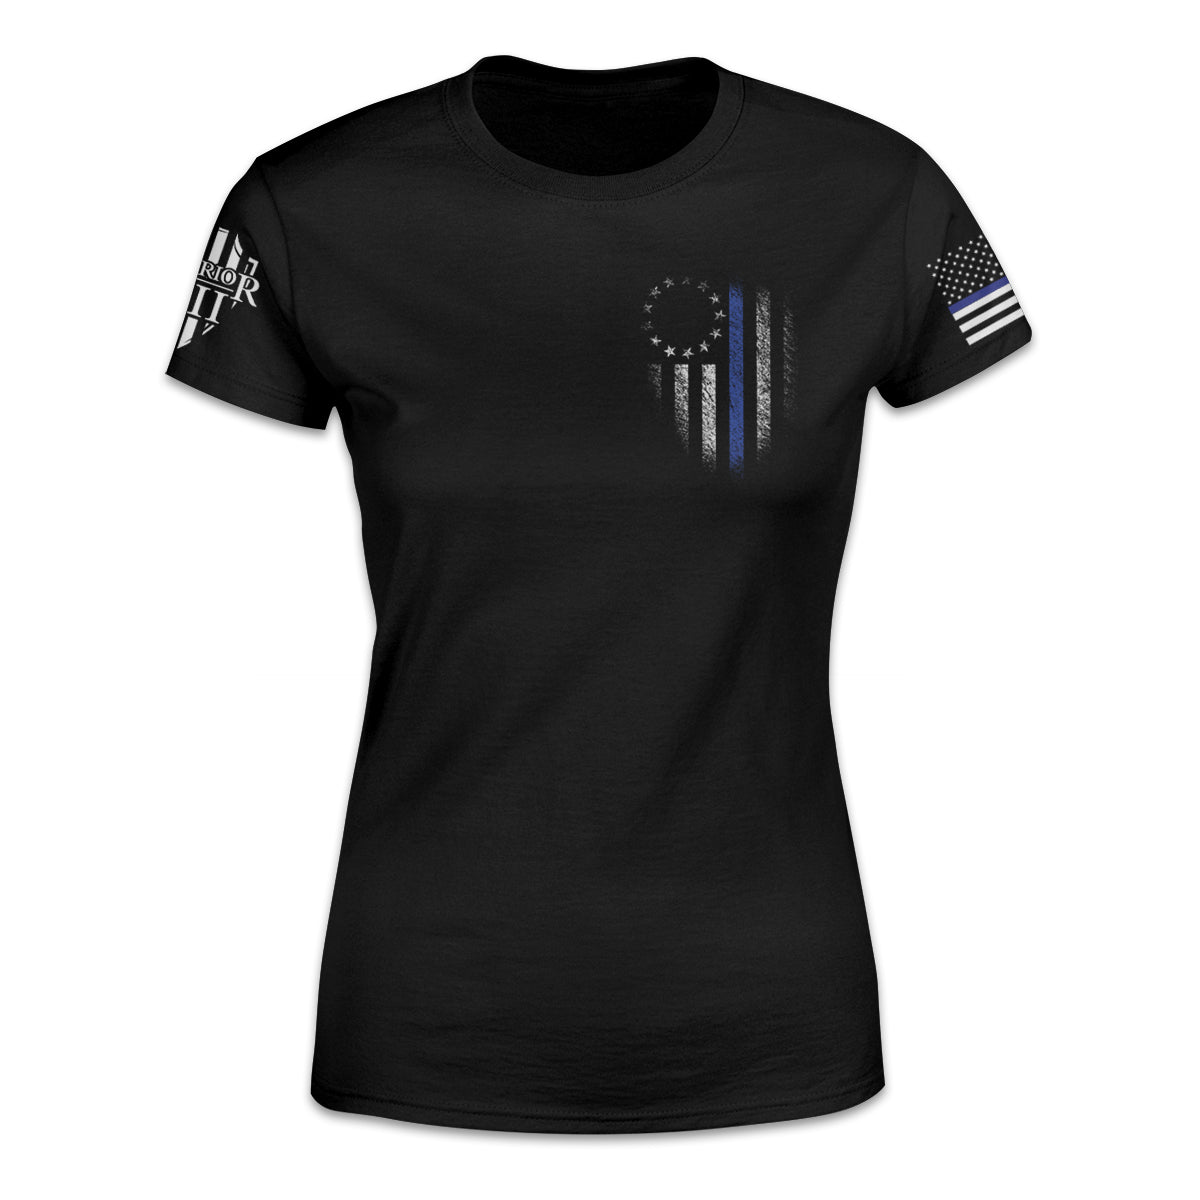 A black women's relaxed fit shirt with the thin blue line betsy ross flag printed on the front left chest of the shirt.